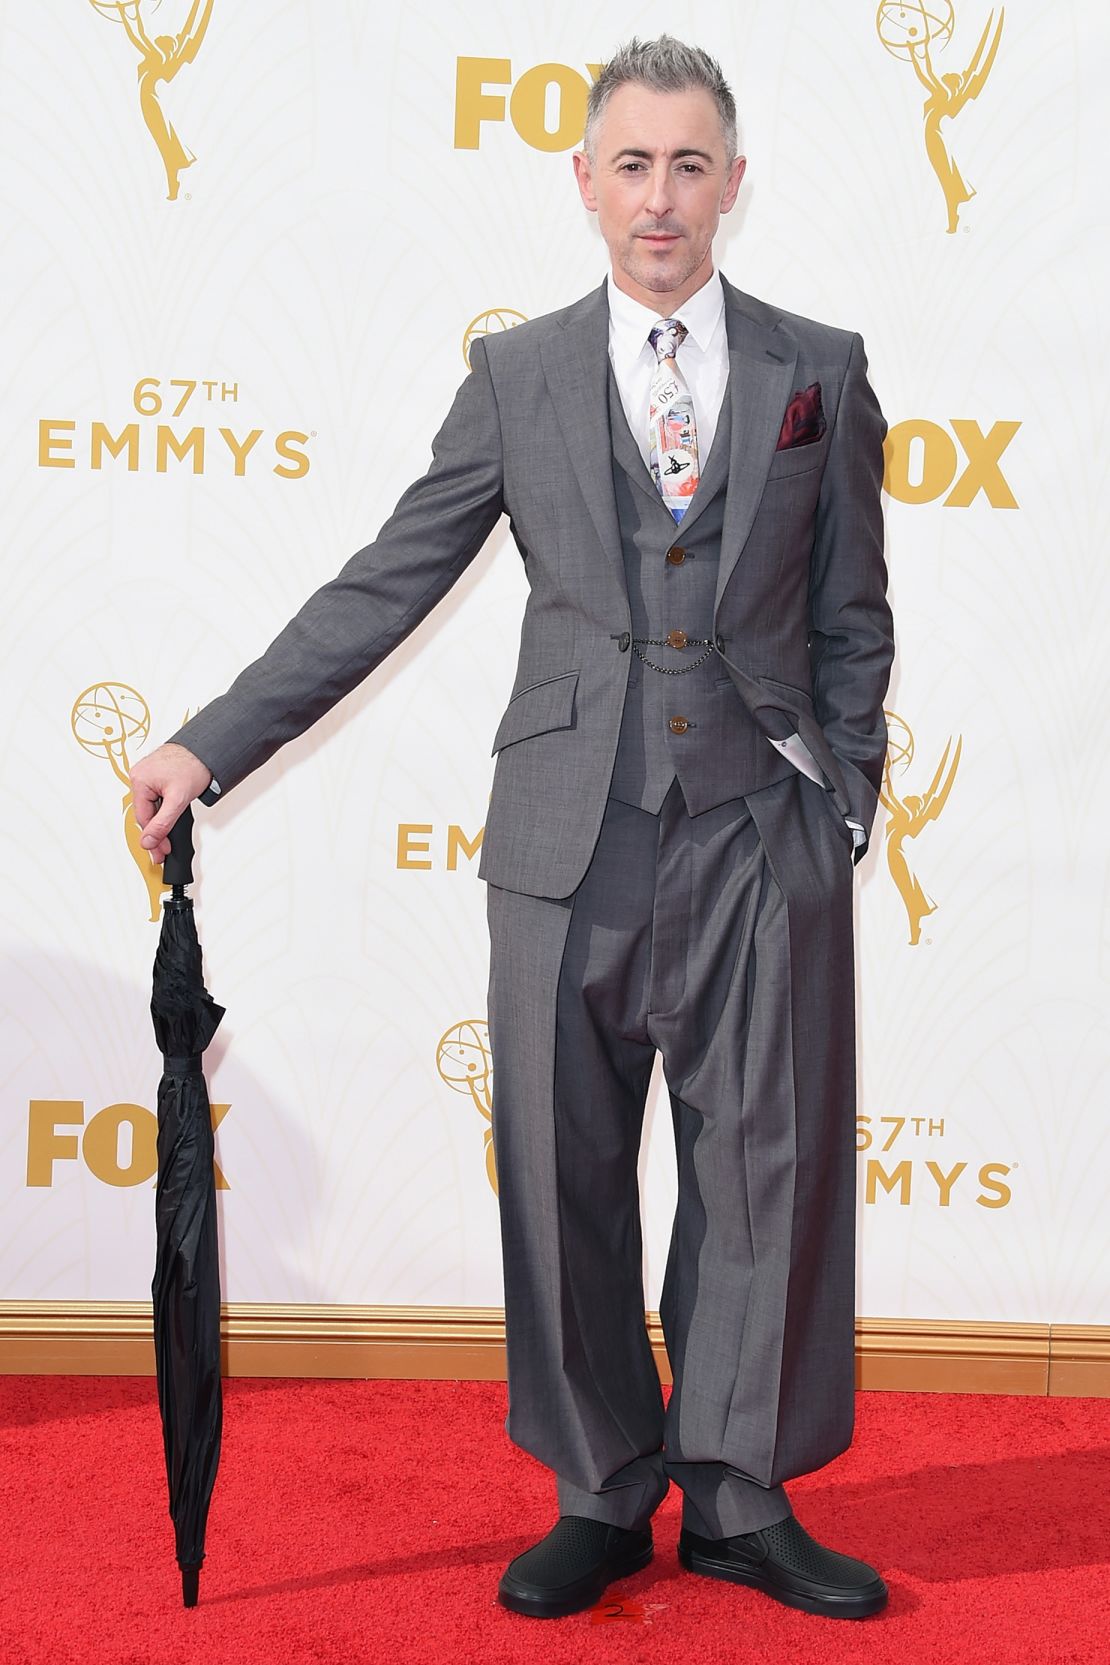 Alan Cumming attends the 67th Primetime Emmy Awards in a Vivienne Westwood suit and black Crocs.